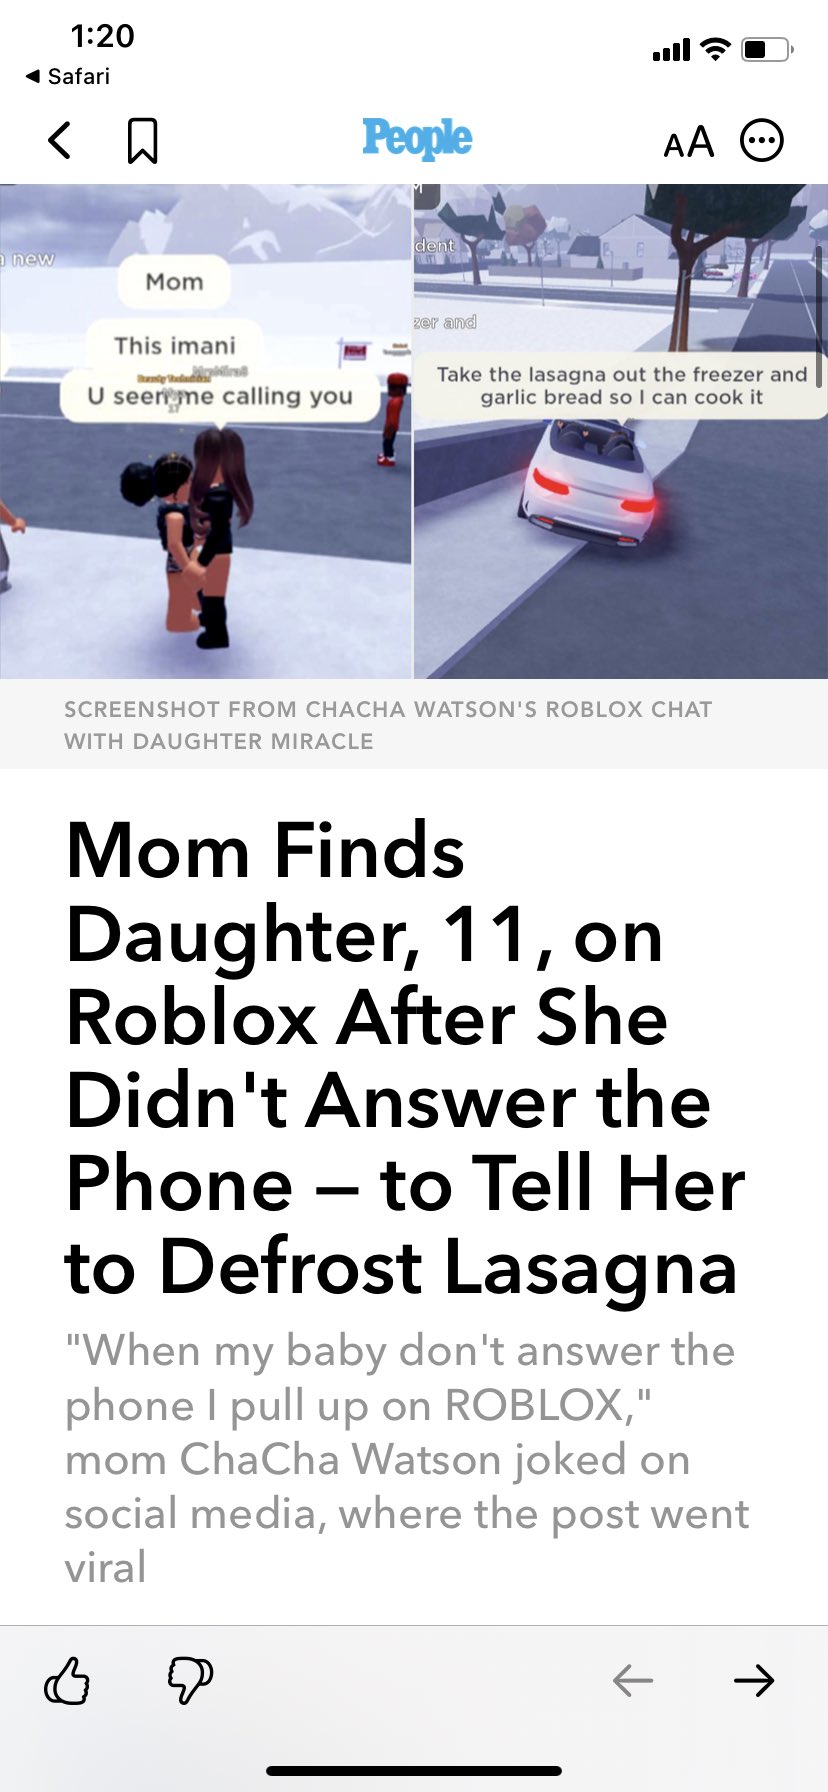 Mom gets savvy, tells daughter to defrost dinner via Roblox - Upworthy